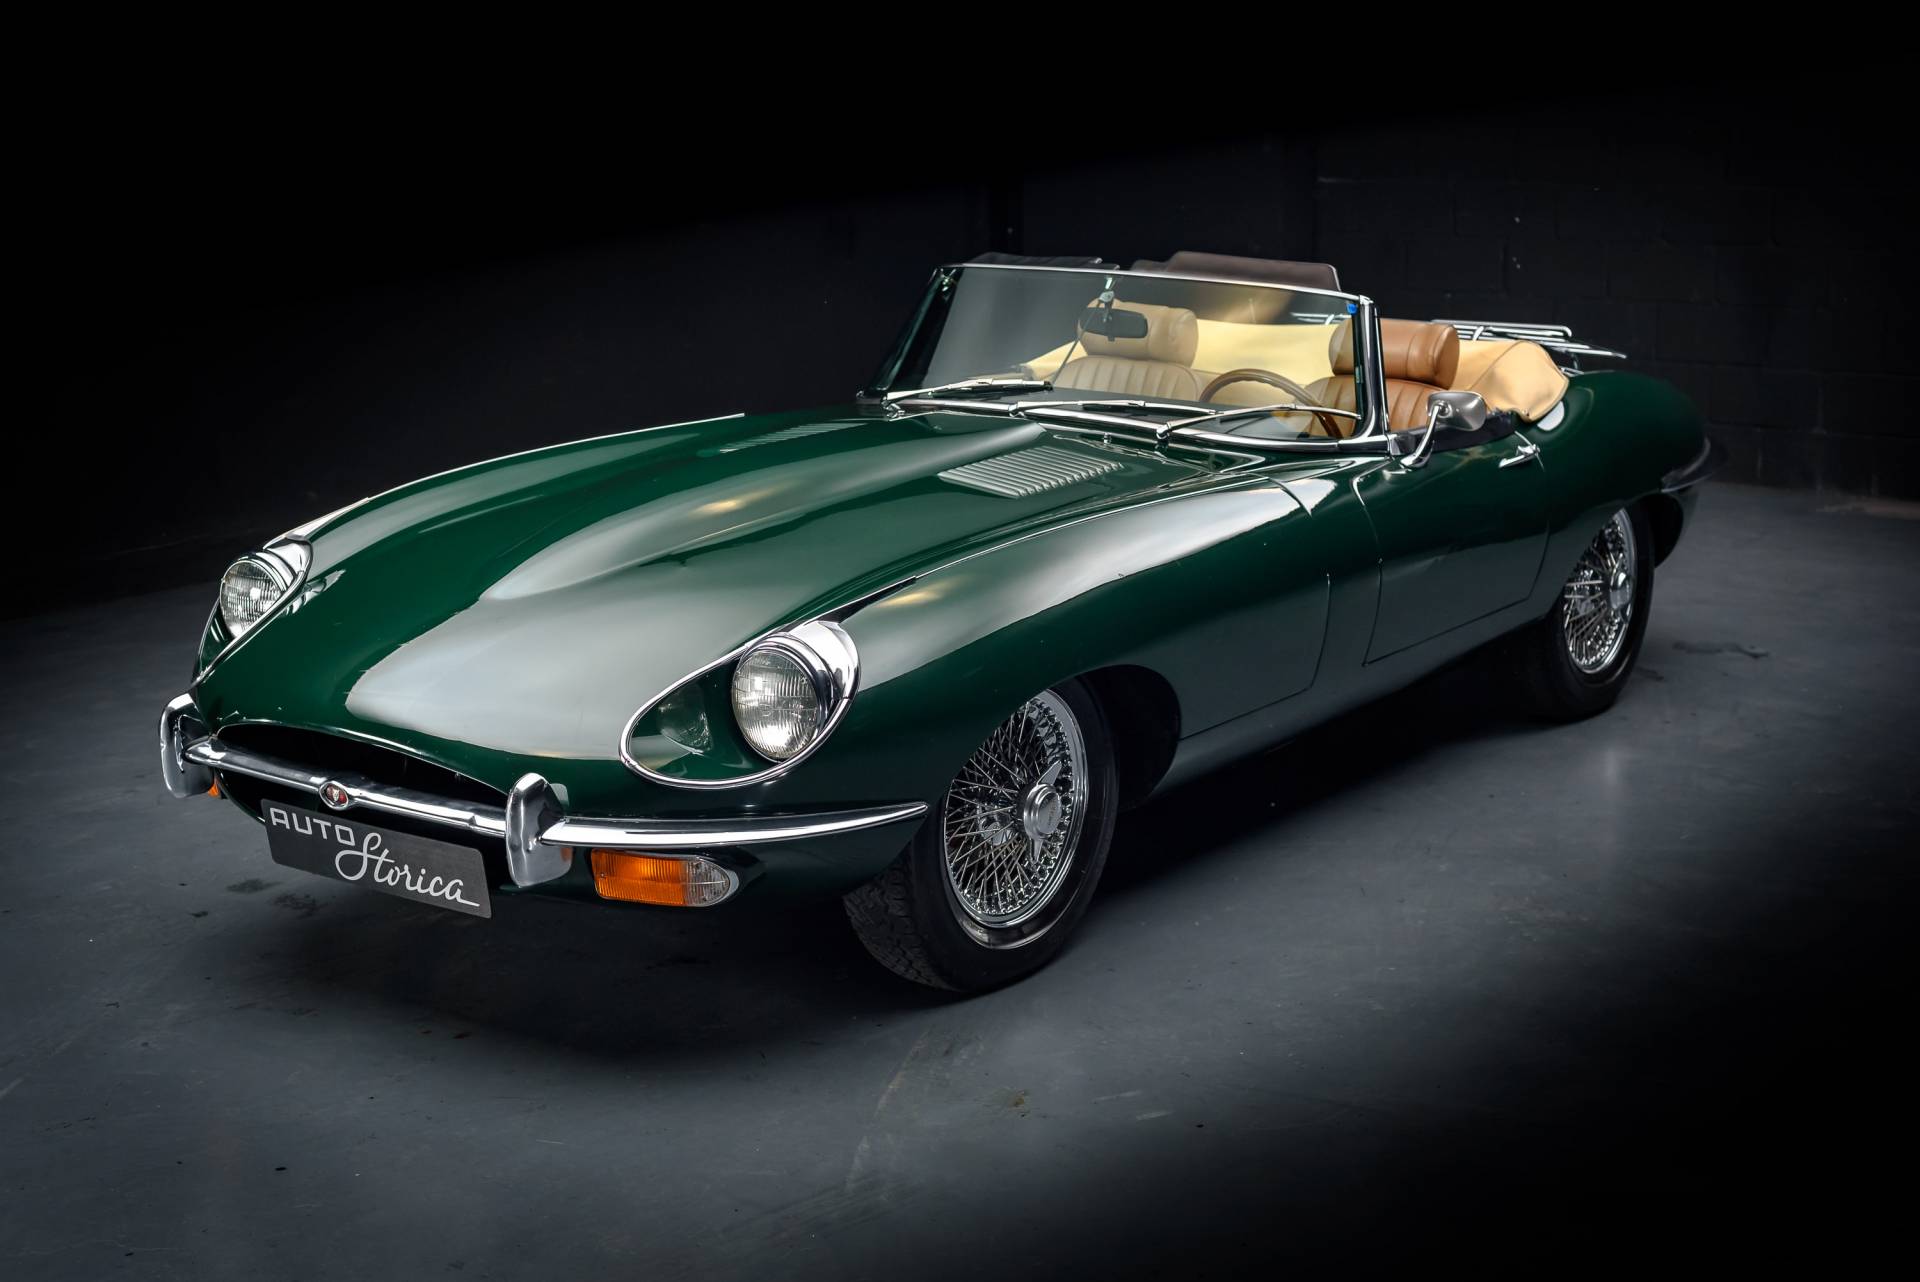 For Sale Jaguar  E  Type  1969 offered for GBP 97 837